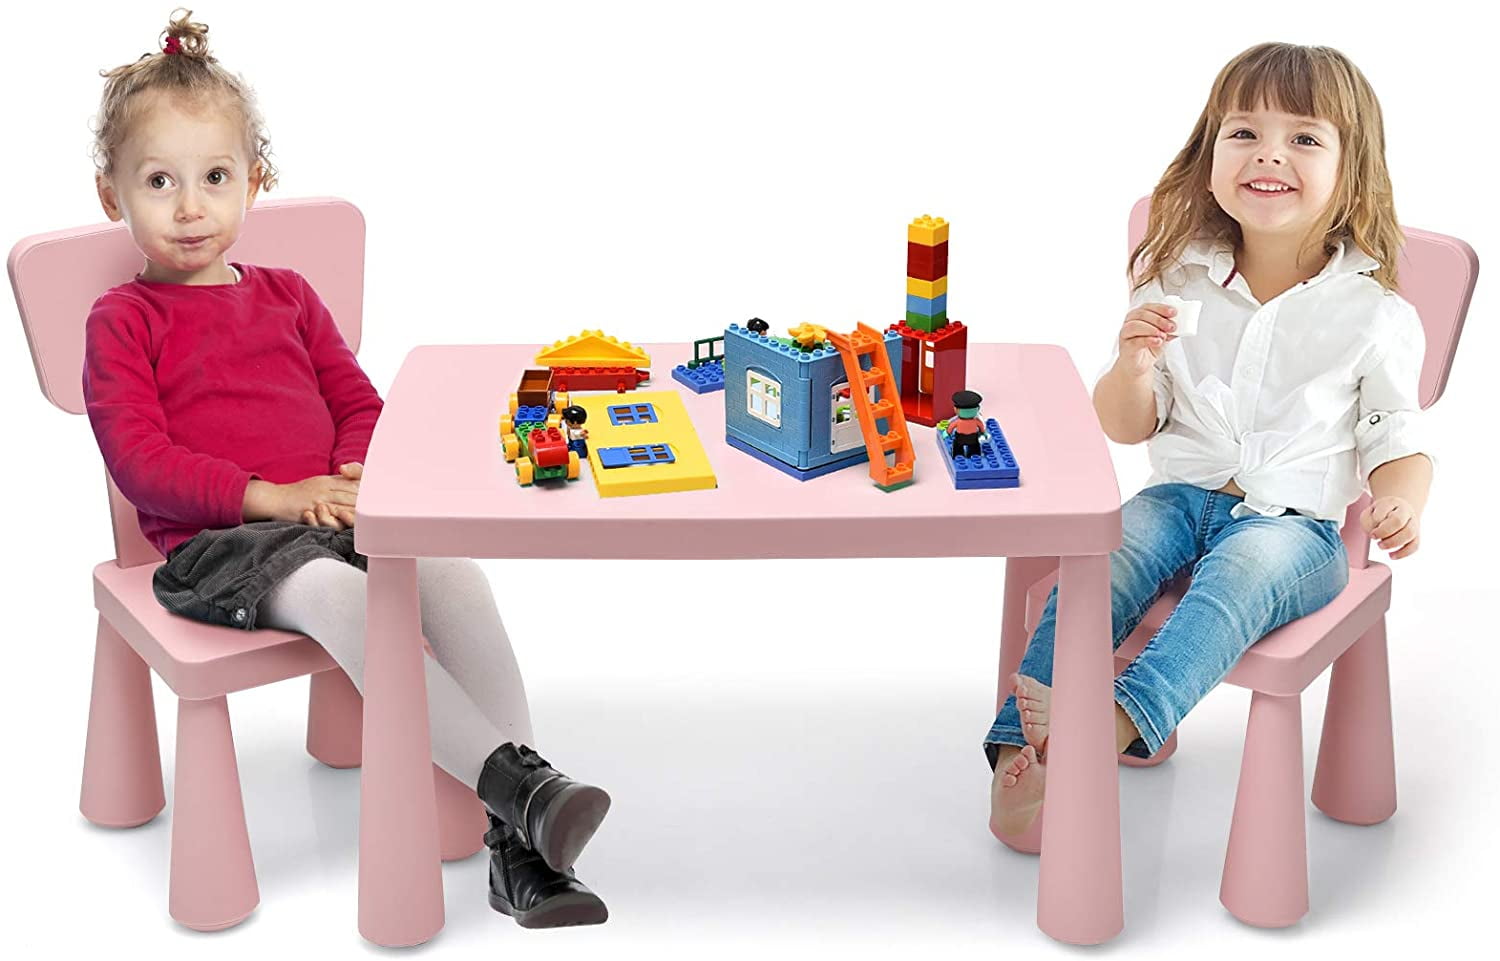 Plastic Kids Table and 2 Chairs Set for Boys or Girls Toddler by Zyooh Pink_A Childrens Study Table Set US Made Kids Furniture 